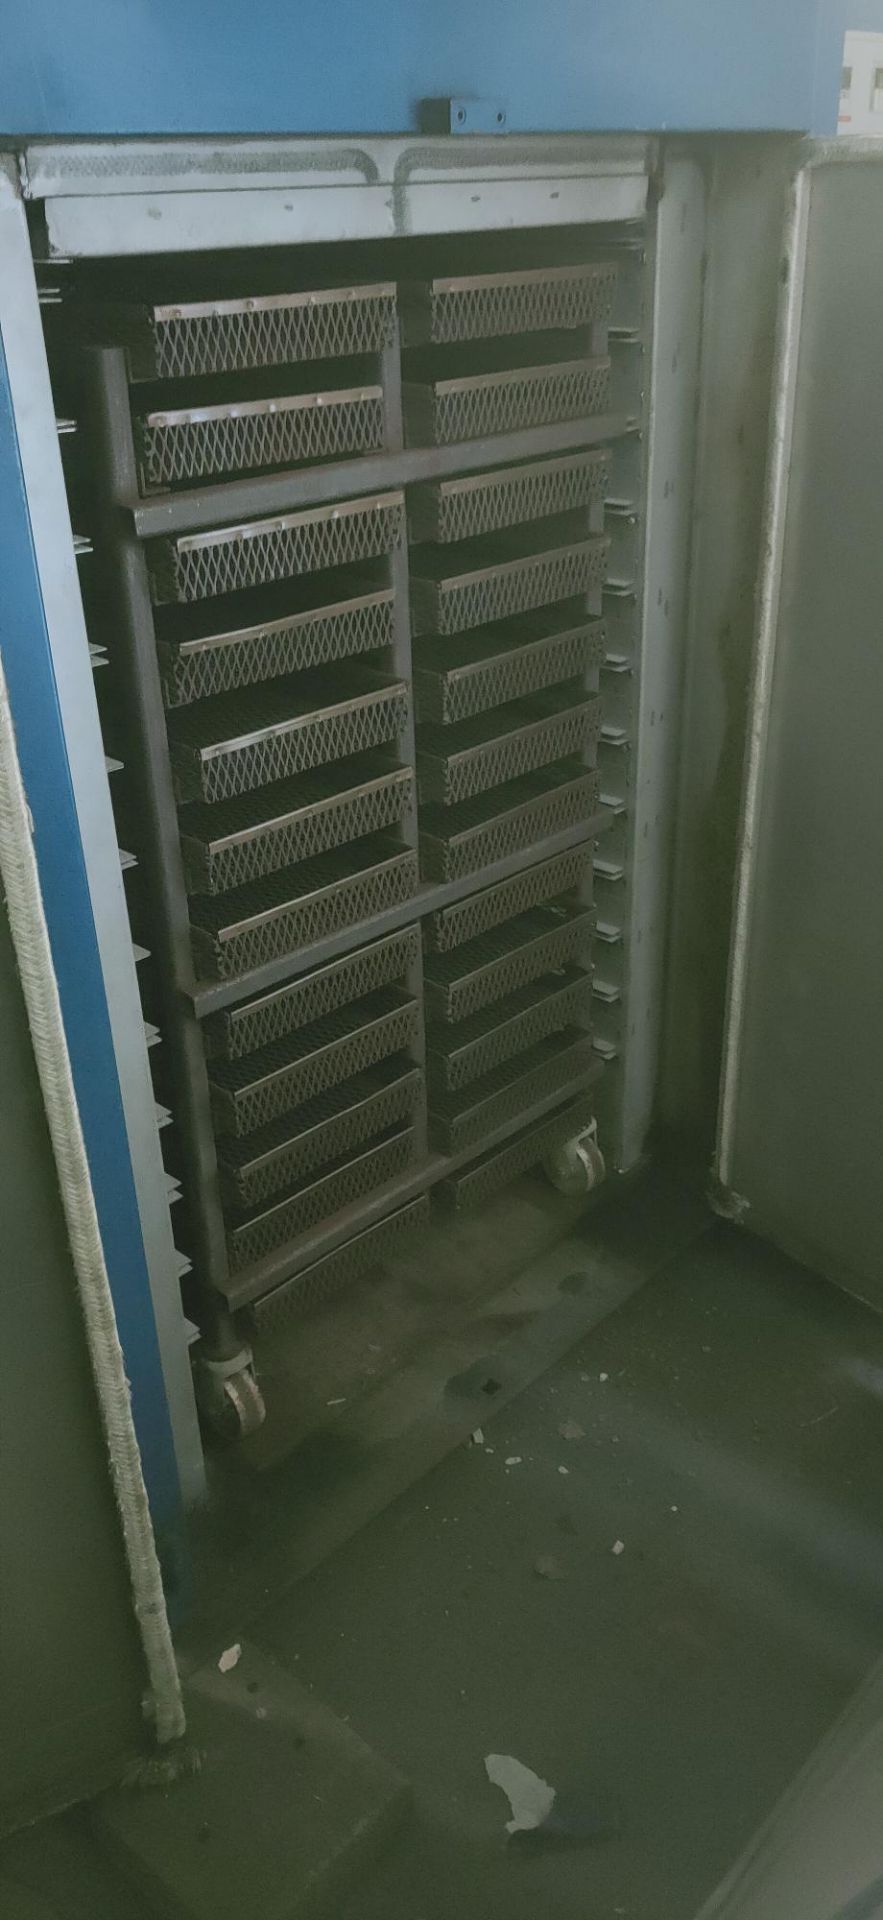 Marr Electric Forced Air Circulating Oven, serial no. 13269, approx. 1250cm x 800cm x 800cm, loading - Image 2 of 5